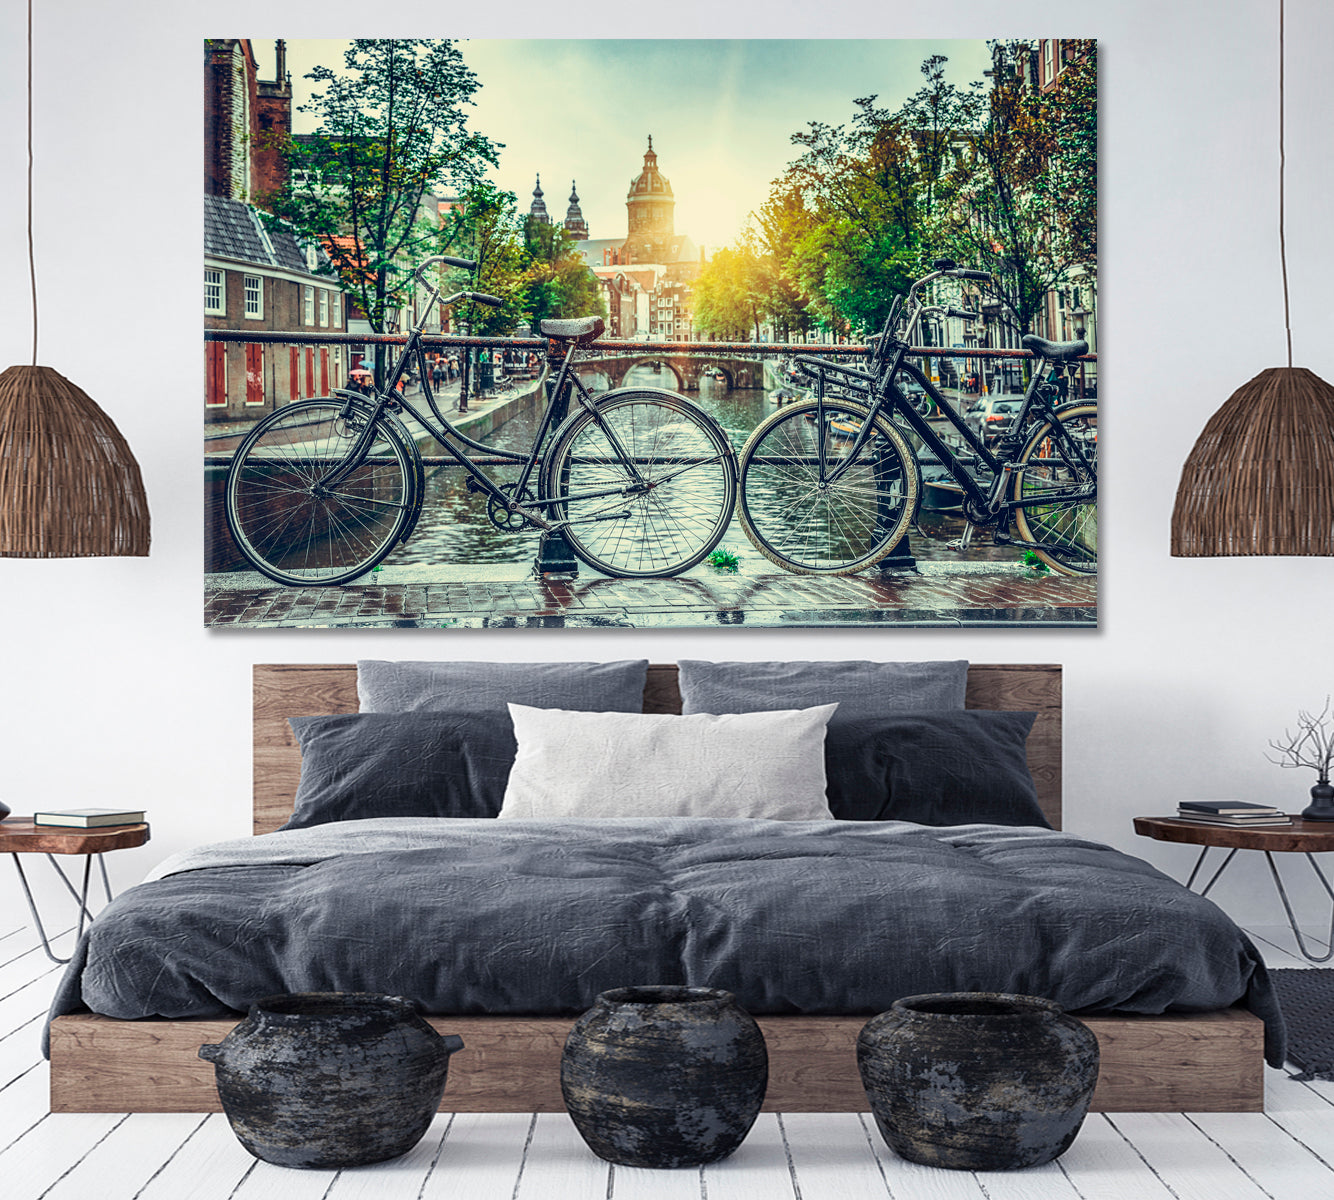 Bicycle Canal Bridge Amsterdam City Netherlands Old Streets Cities Wall Art Artesty 1 panel 24" x 16" 